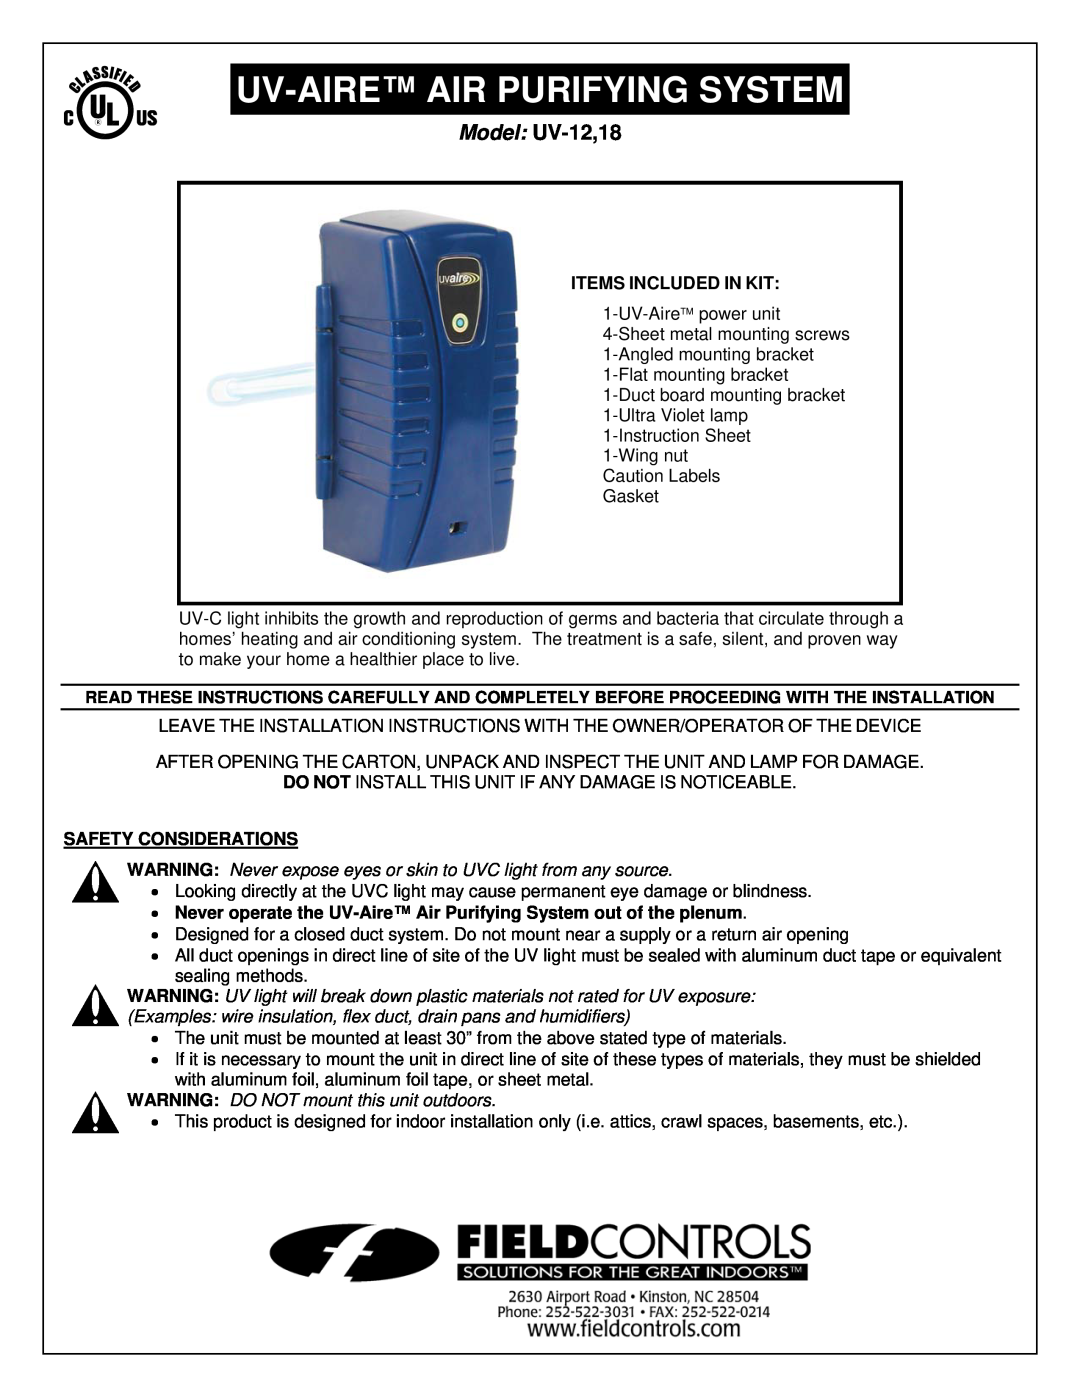 Field Controls UV-12 installation instructions Items Included In Kit, Safety Considerations, Uv-Aireair Purifying System 